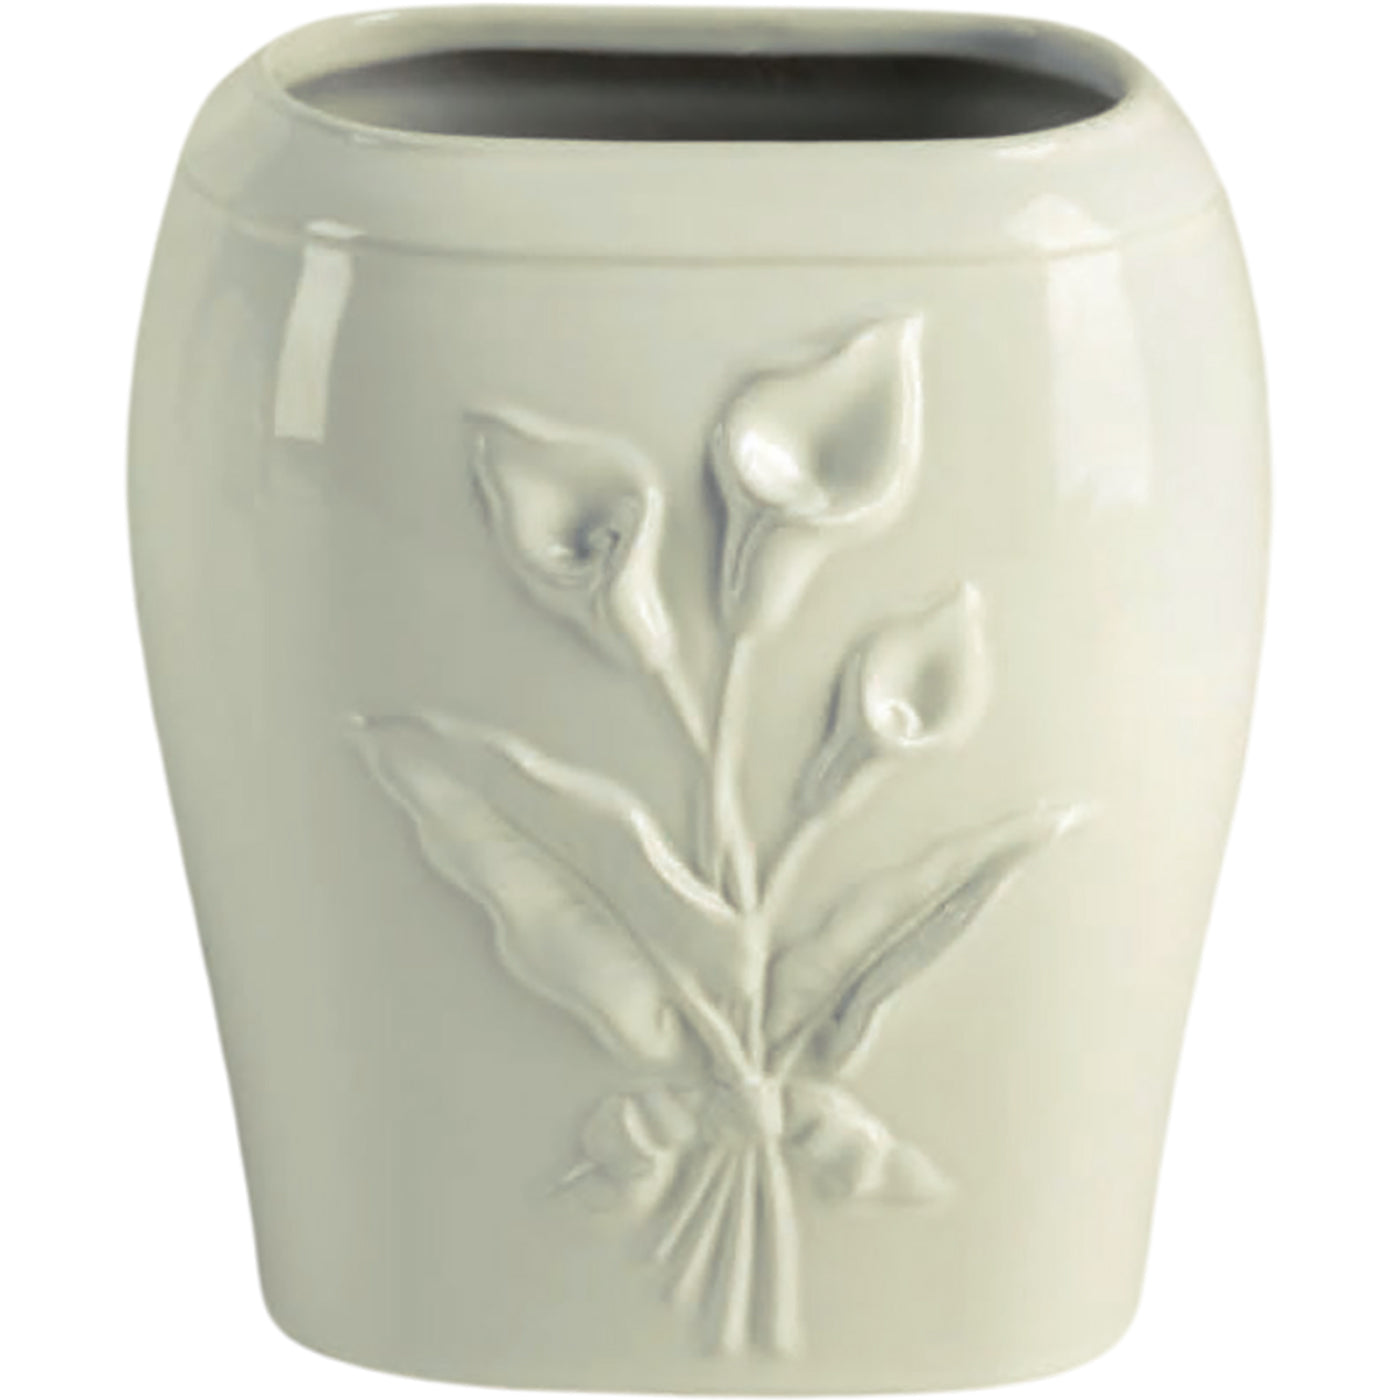 Rectangular grave vase Calla ivory 19x17cm - 7.5x6.7in In ivory porcelain, wall attached CAL160P/A